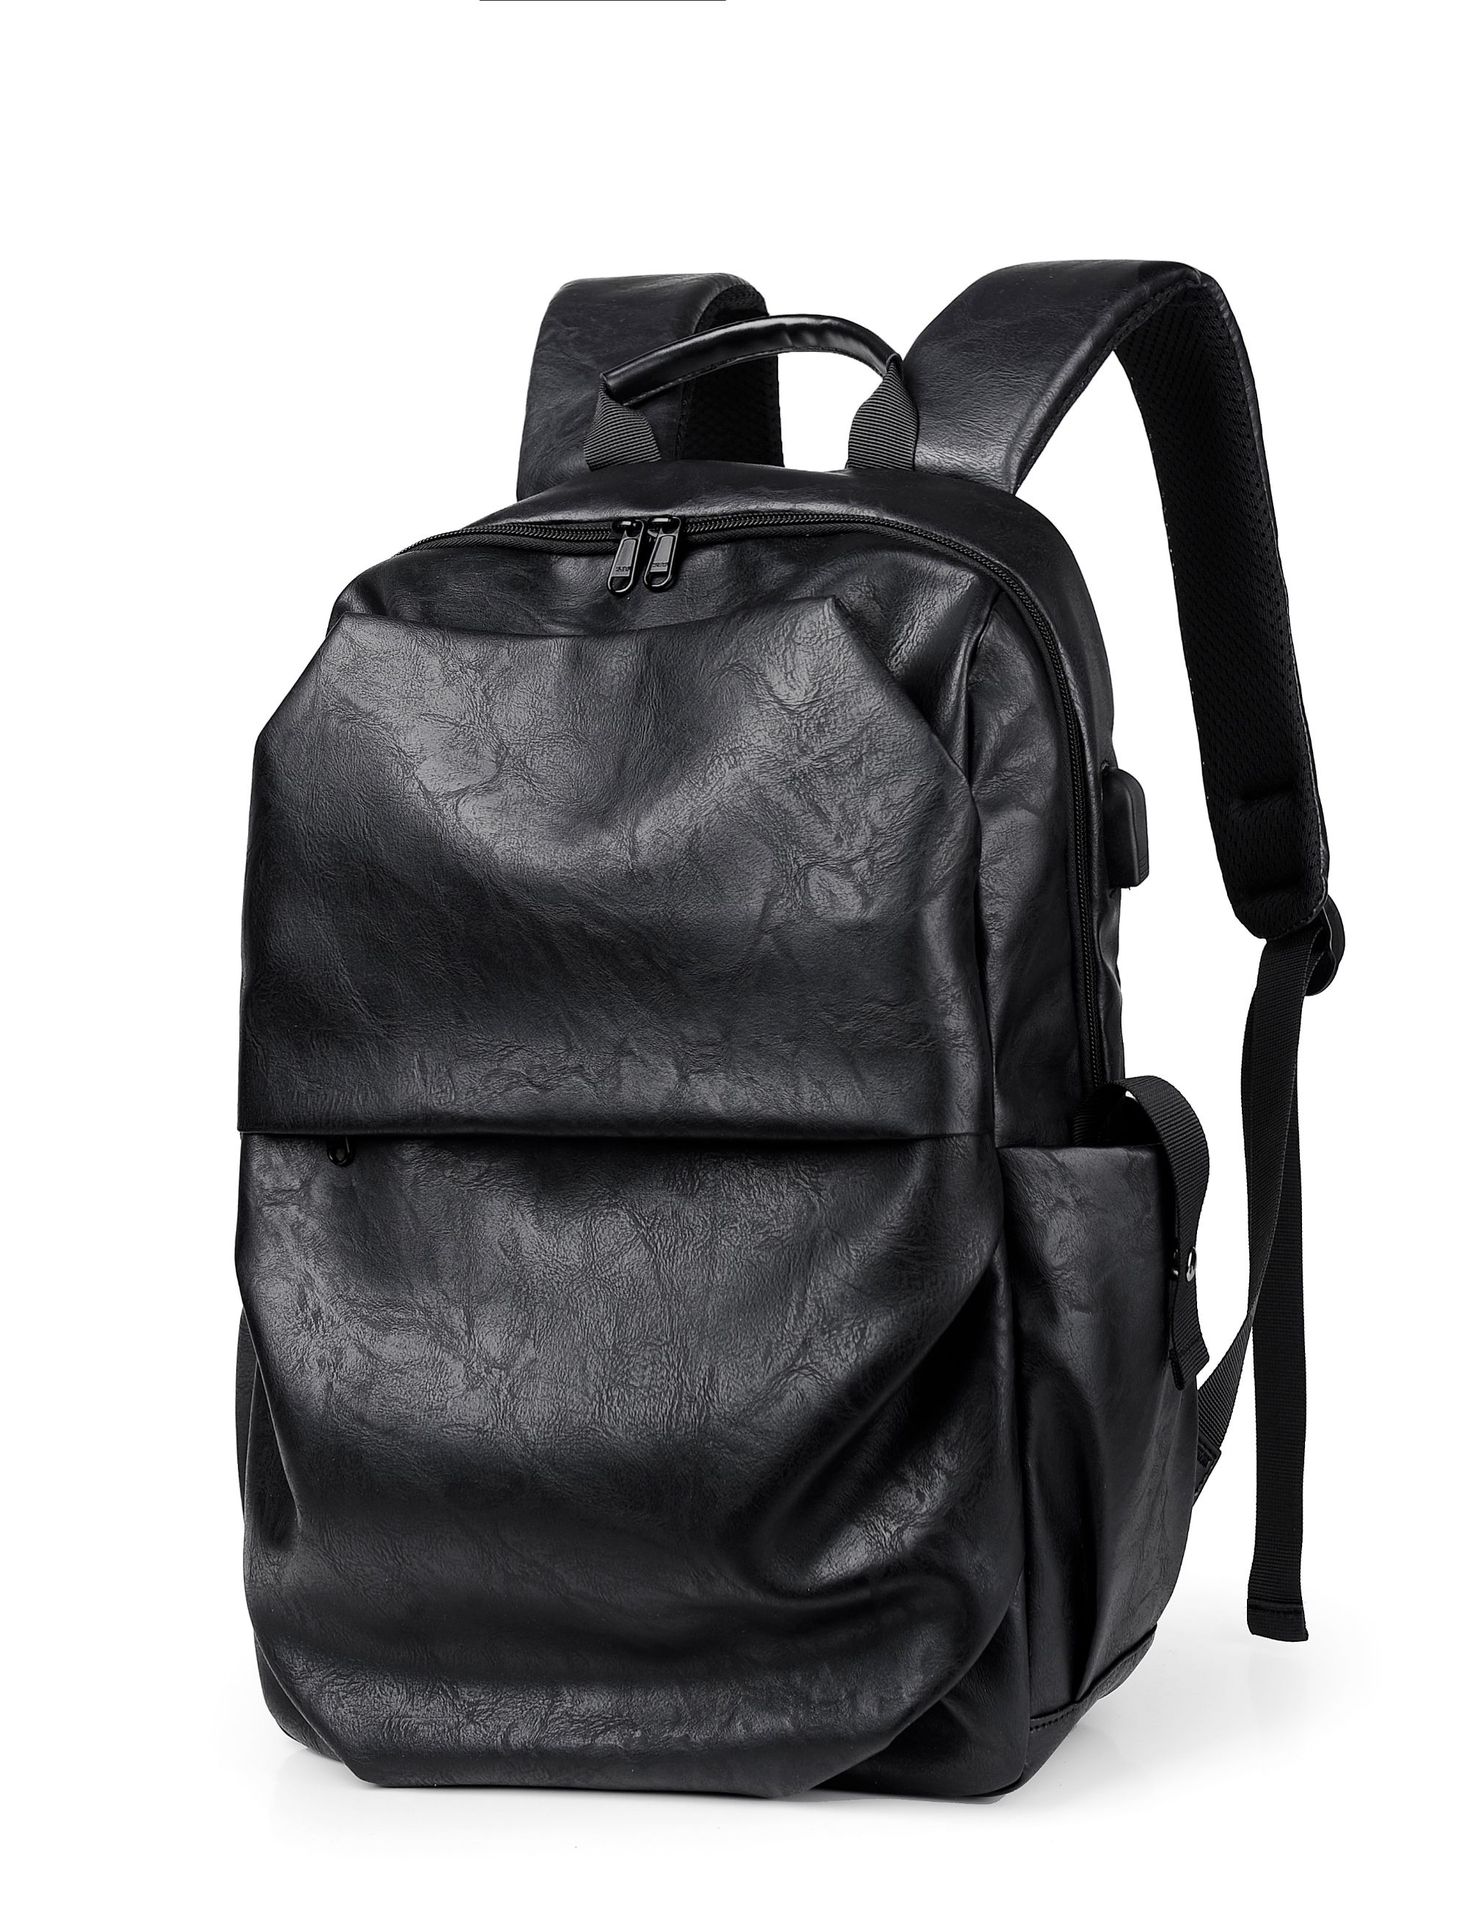 Quality Men's Bag New Backpack Pu Large Capacity Computer Bag Business Trip Leisure Backpack Men One Piece Dropshipping